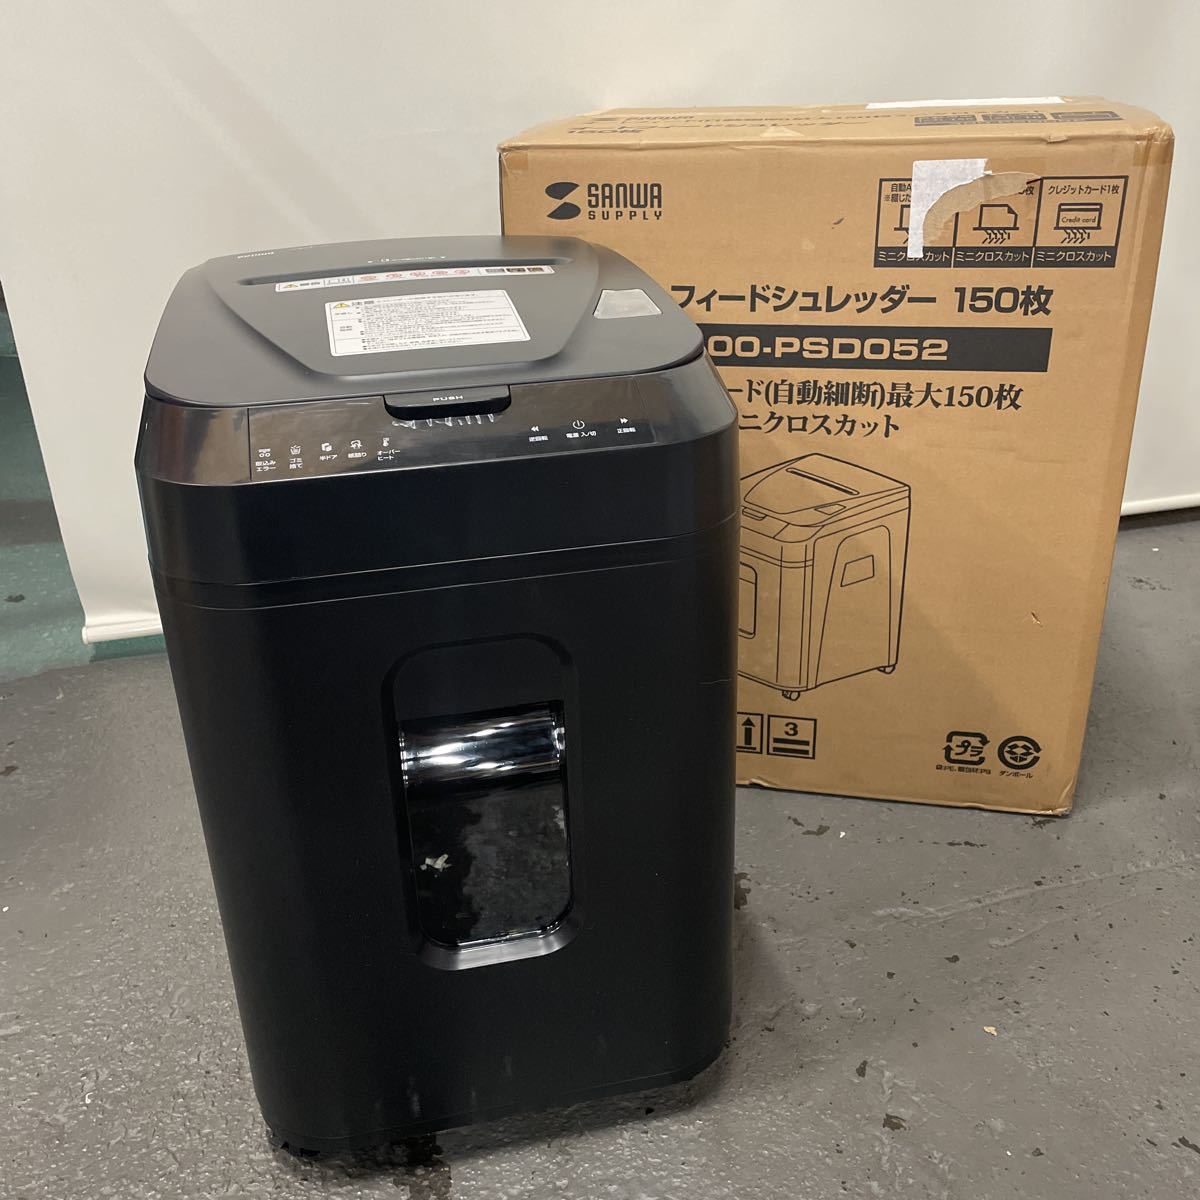 1 jpy start Sanwa Direct shredder business use auto feed automatic small .150 sheets mi Nicross cut high capacity 32.2L card / stapler correspondence 